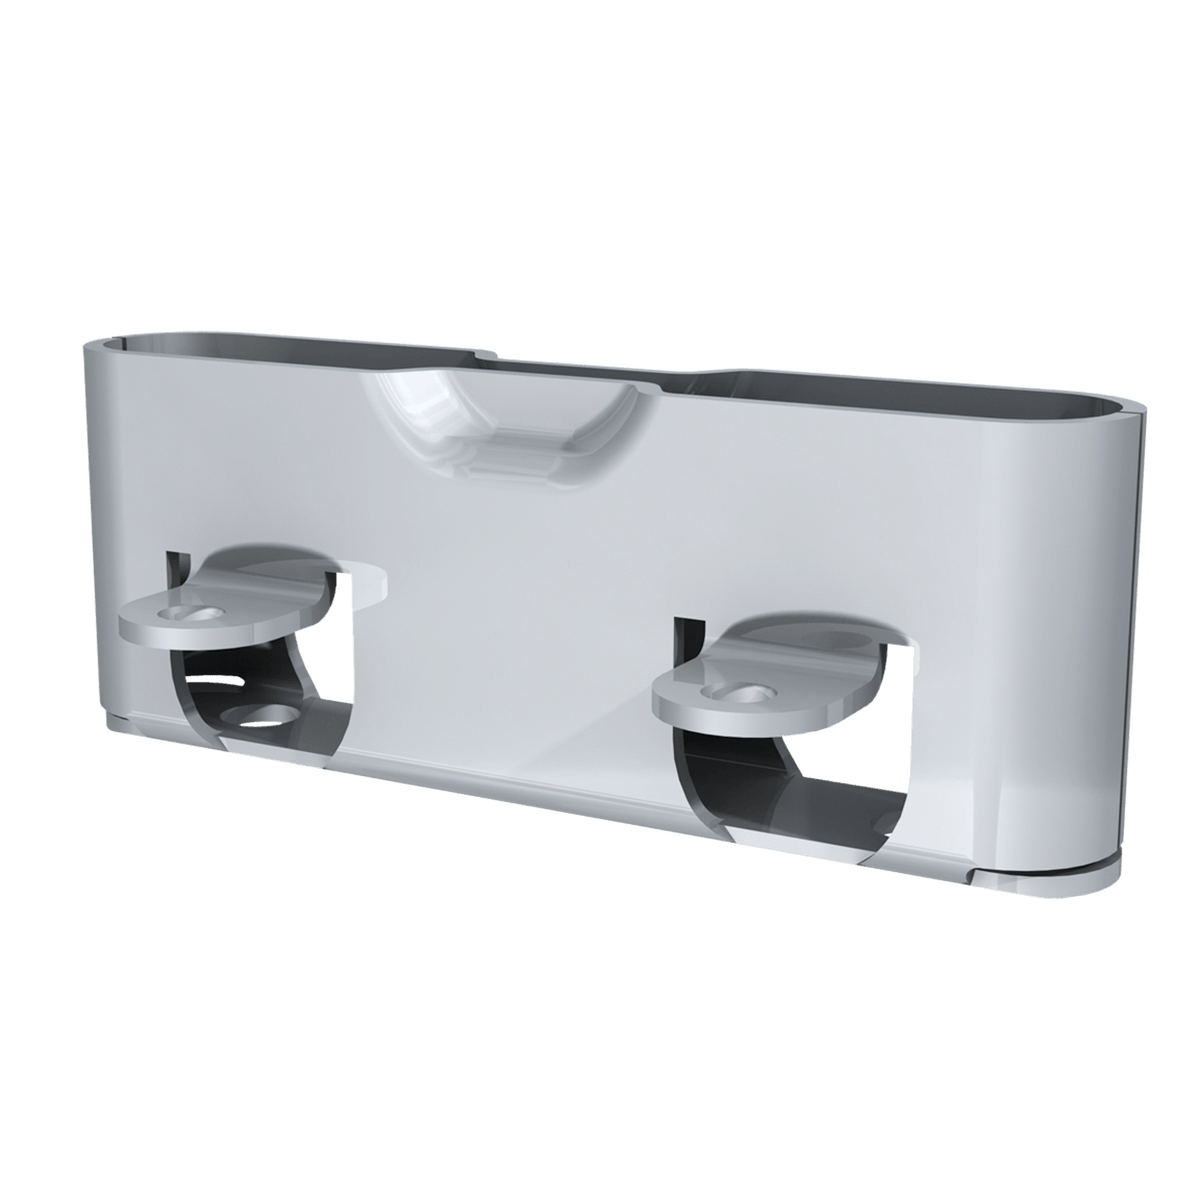 Southco Shallow Tab Roto-Lock - Réceptacle - R2-0257-02 vue en perspective